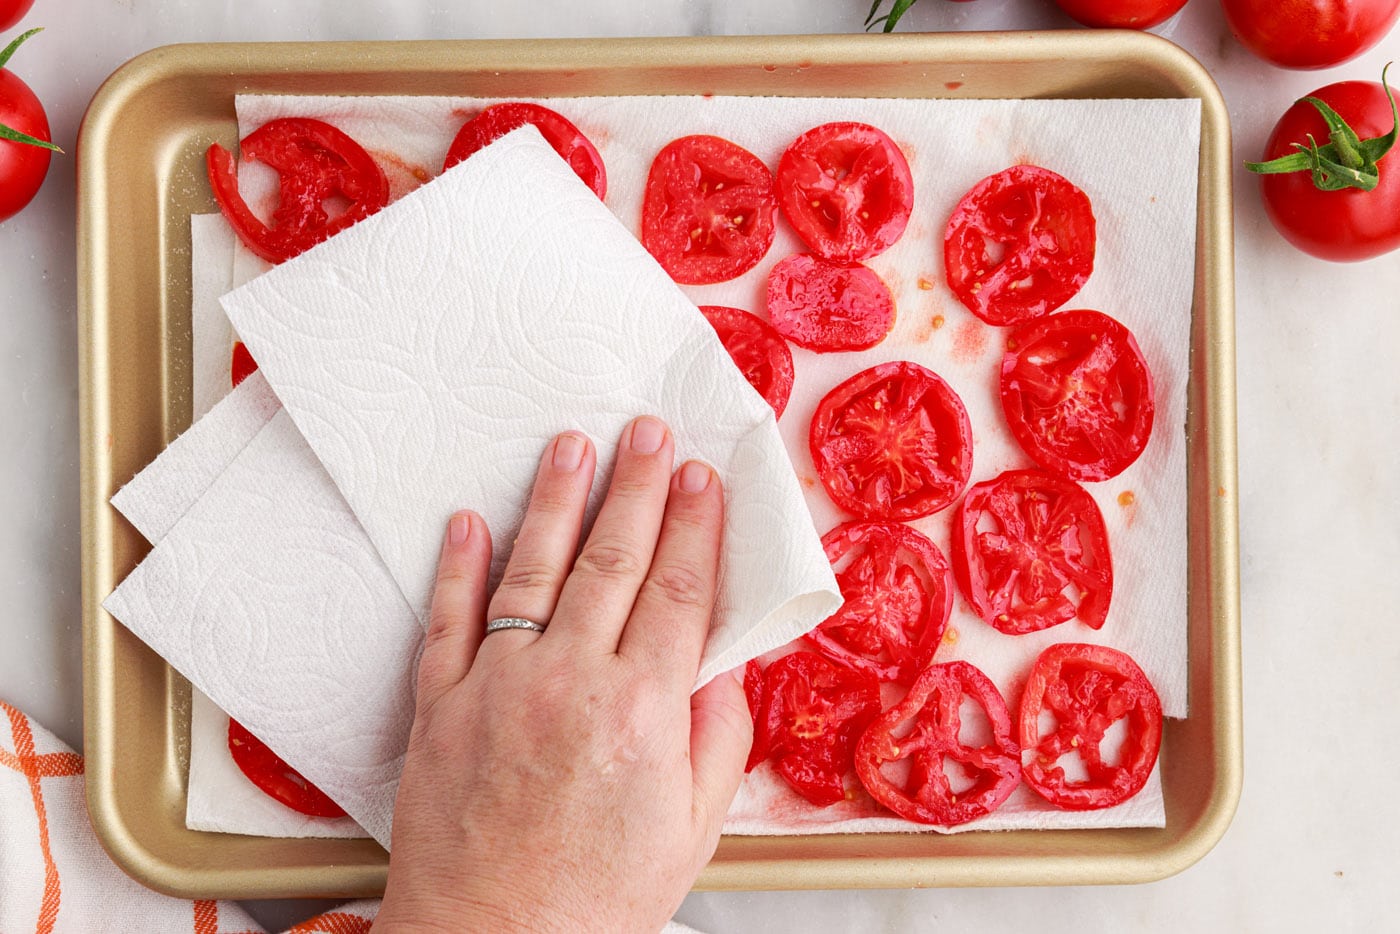 patting tomatoes dry with paper towels